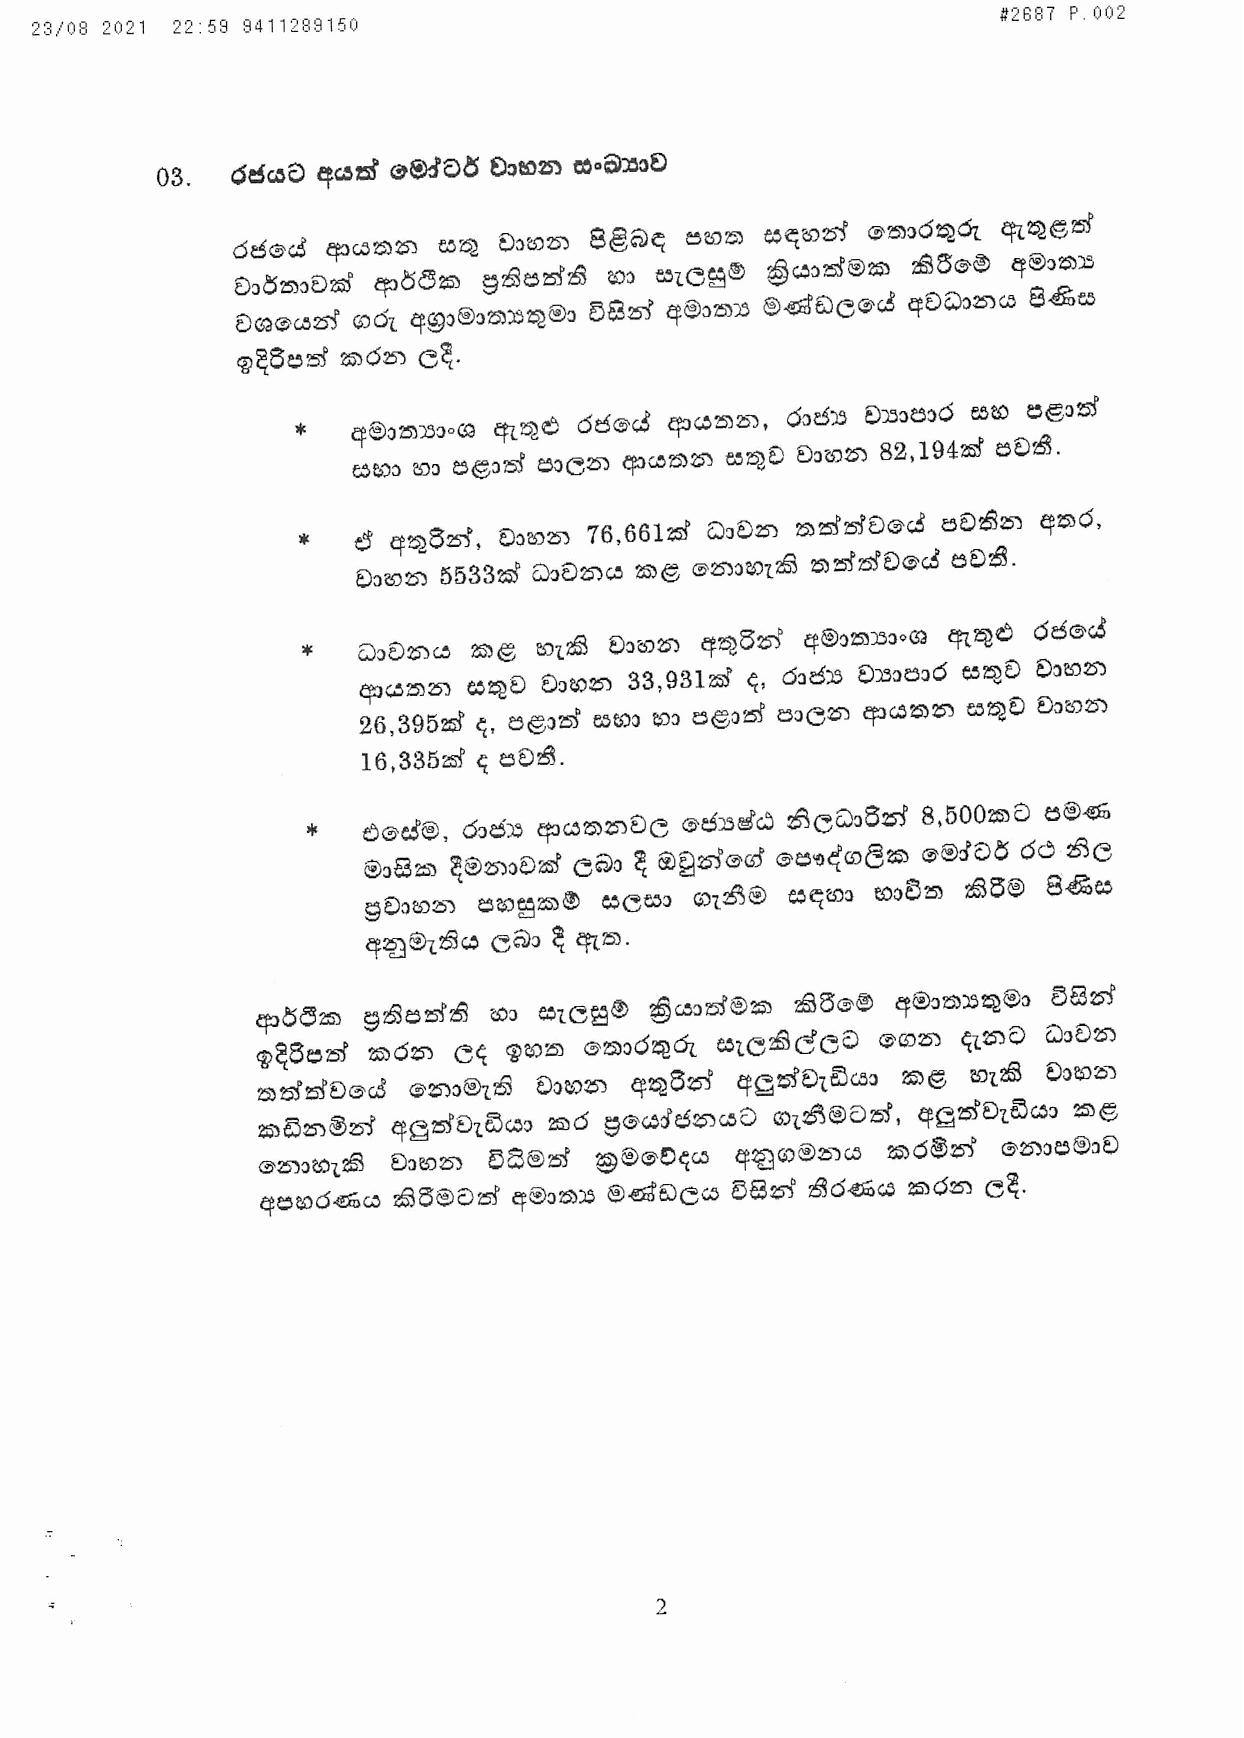 Cabinet Decision on 23.08.2021 page 002